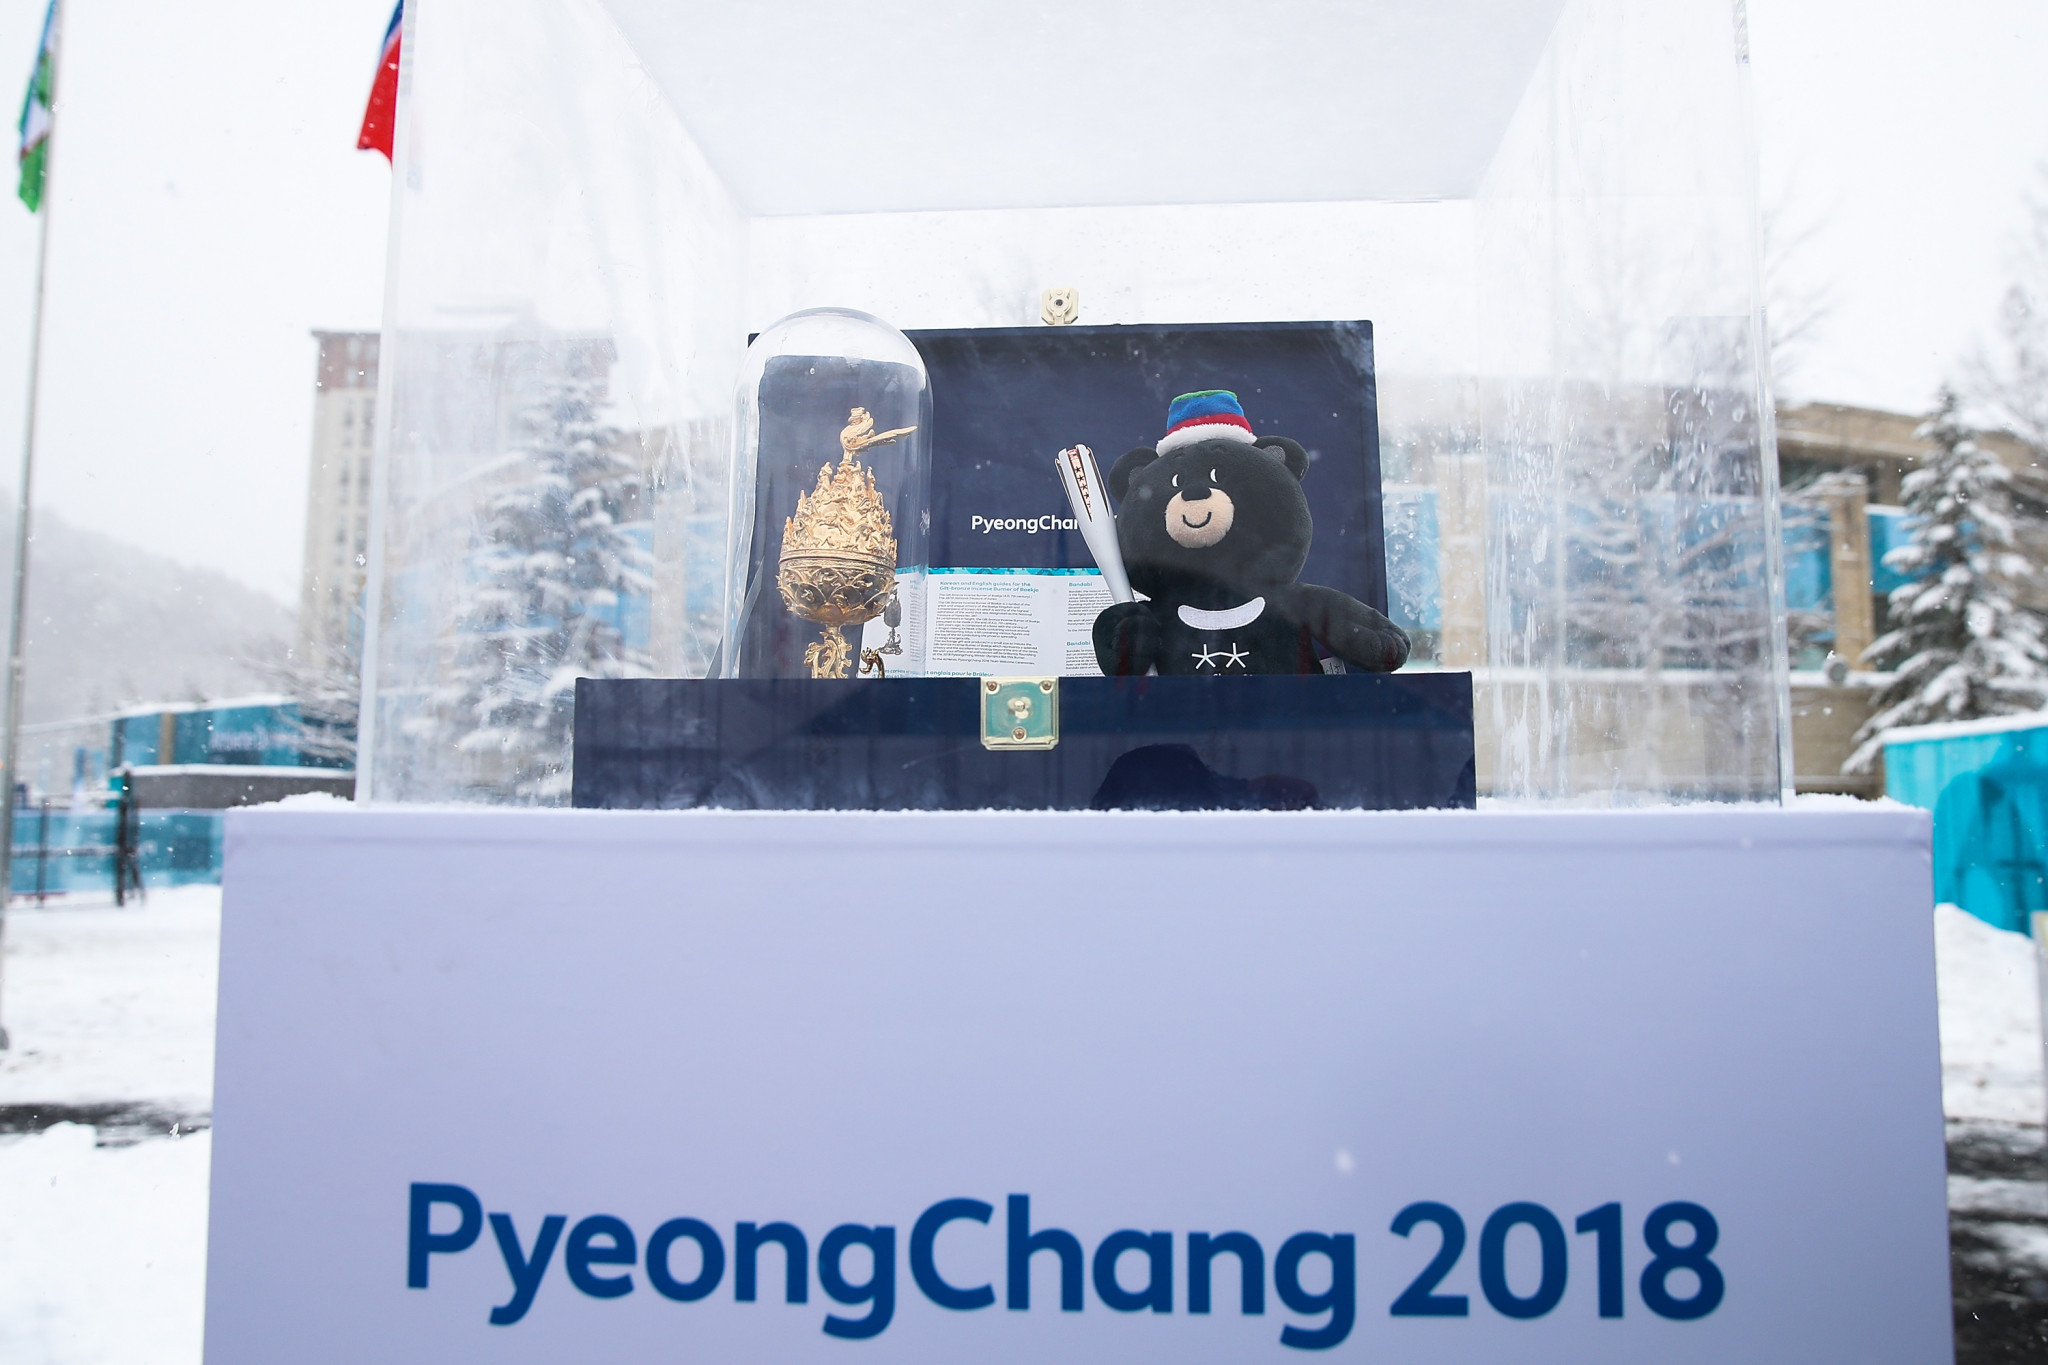 Pyeongchang 2018 Paralympic mascot Bandabi has been on display at the Athletes' Village ahead of the start of the Games ©Getty Images